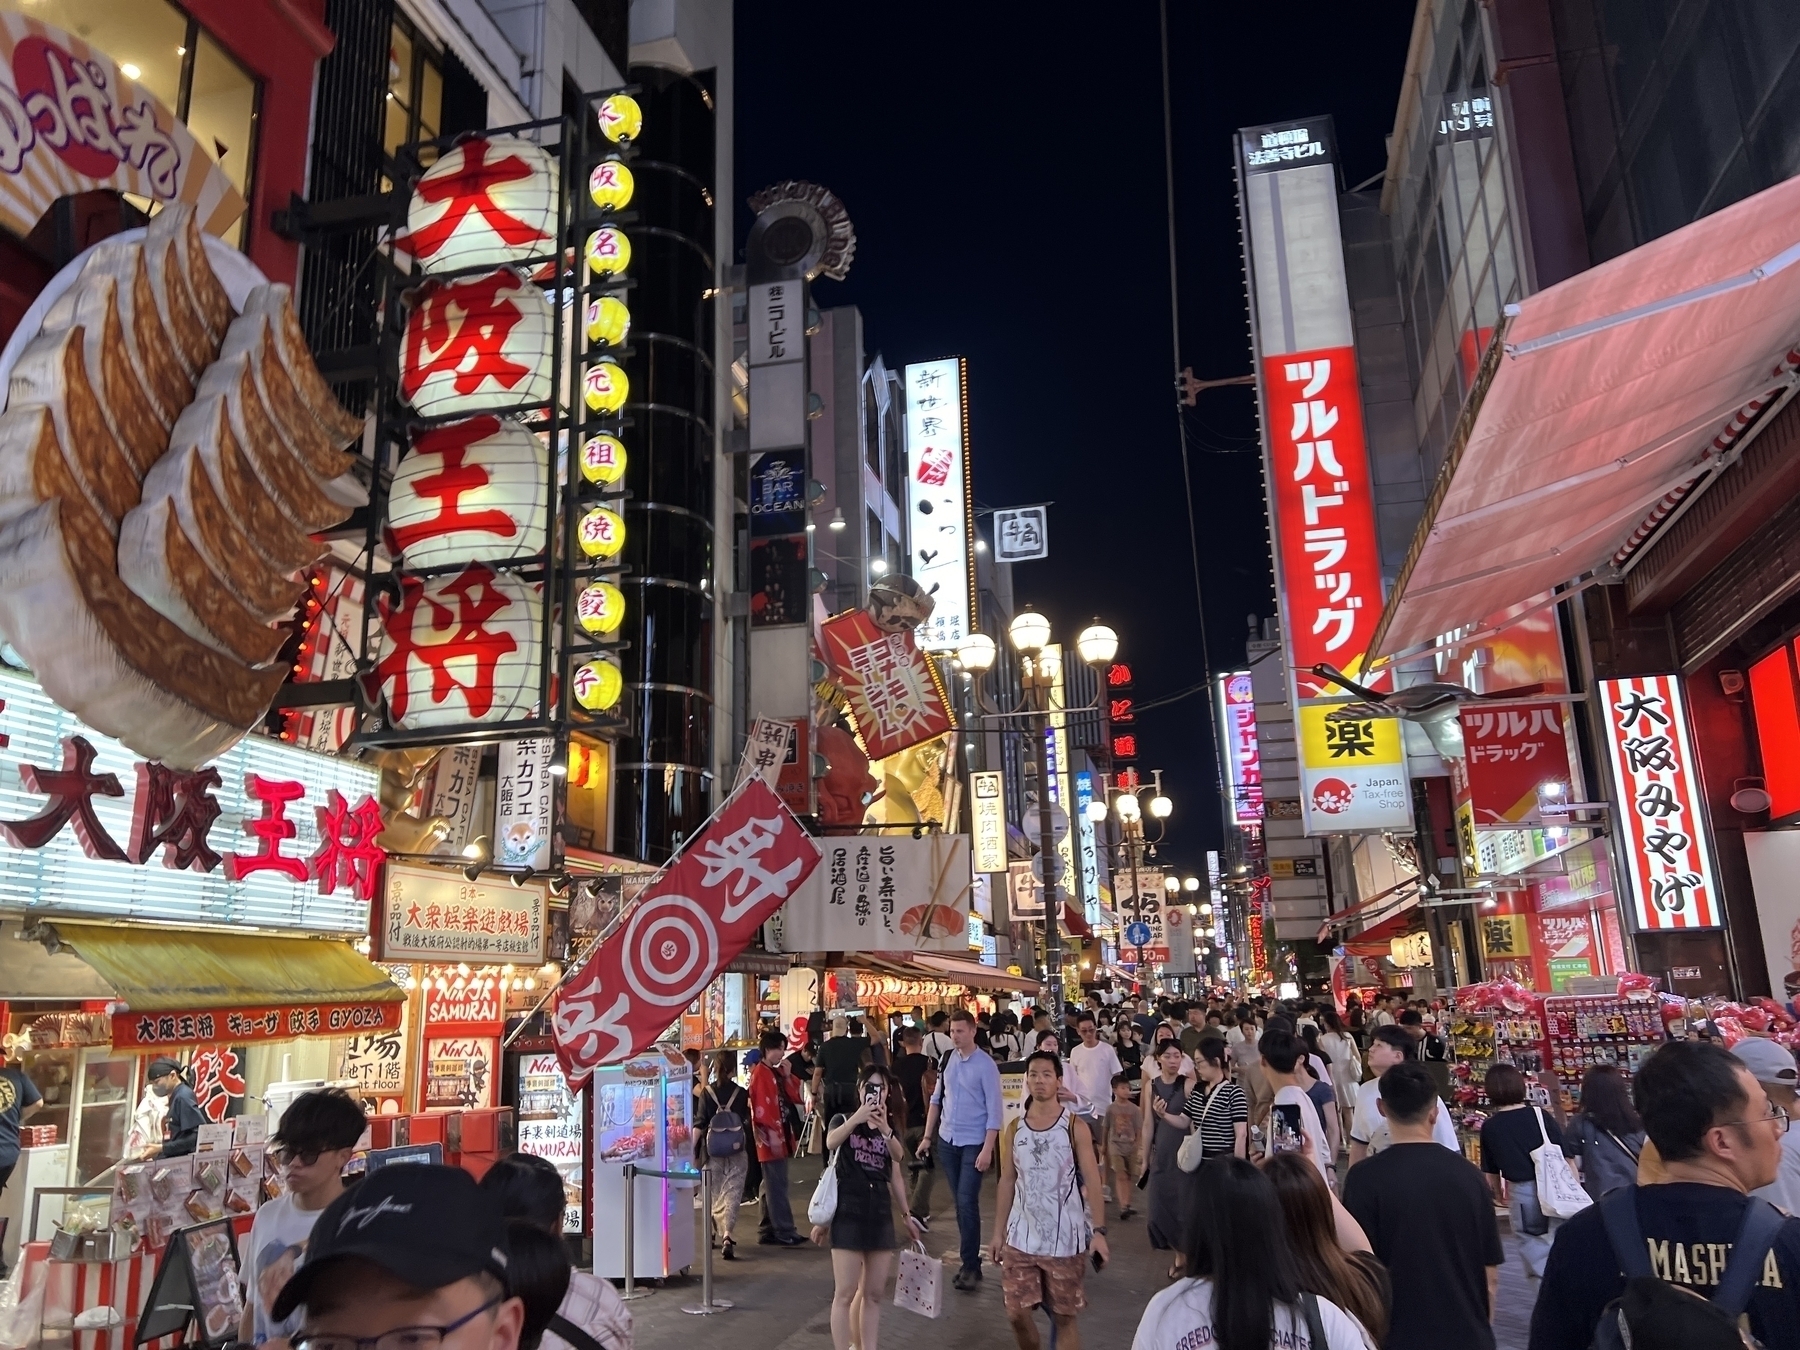 Dotonbori Shopping street at night, crowded, with amazing 3D signage including a giant double serving of gyoza sticking out from one storefront